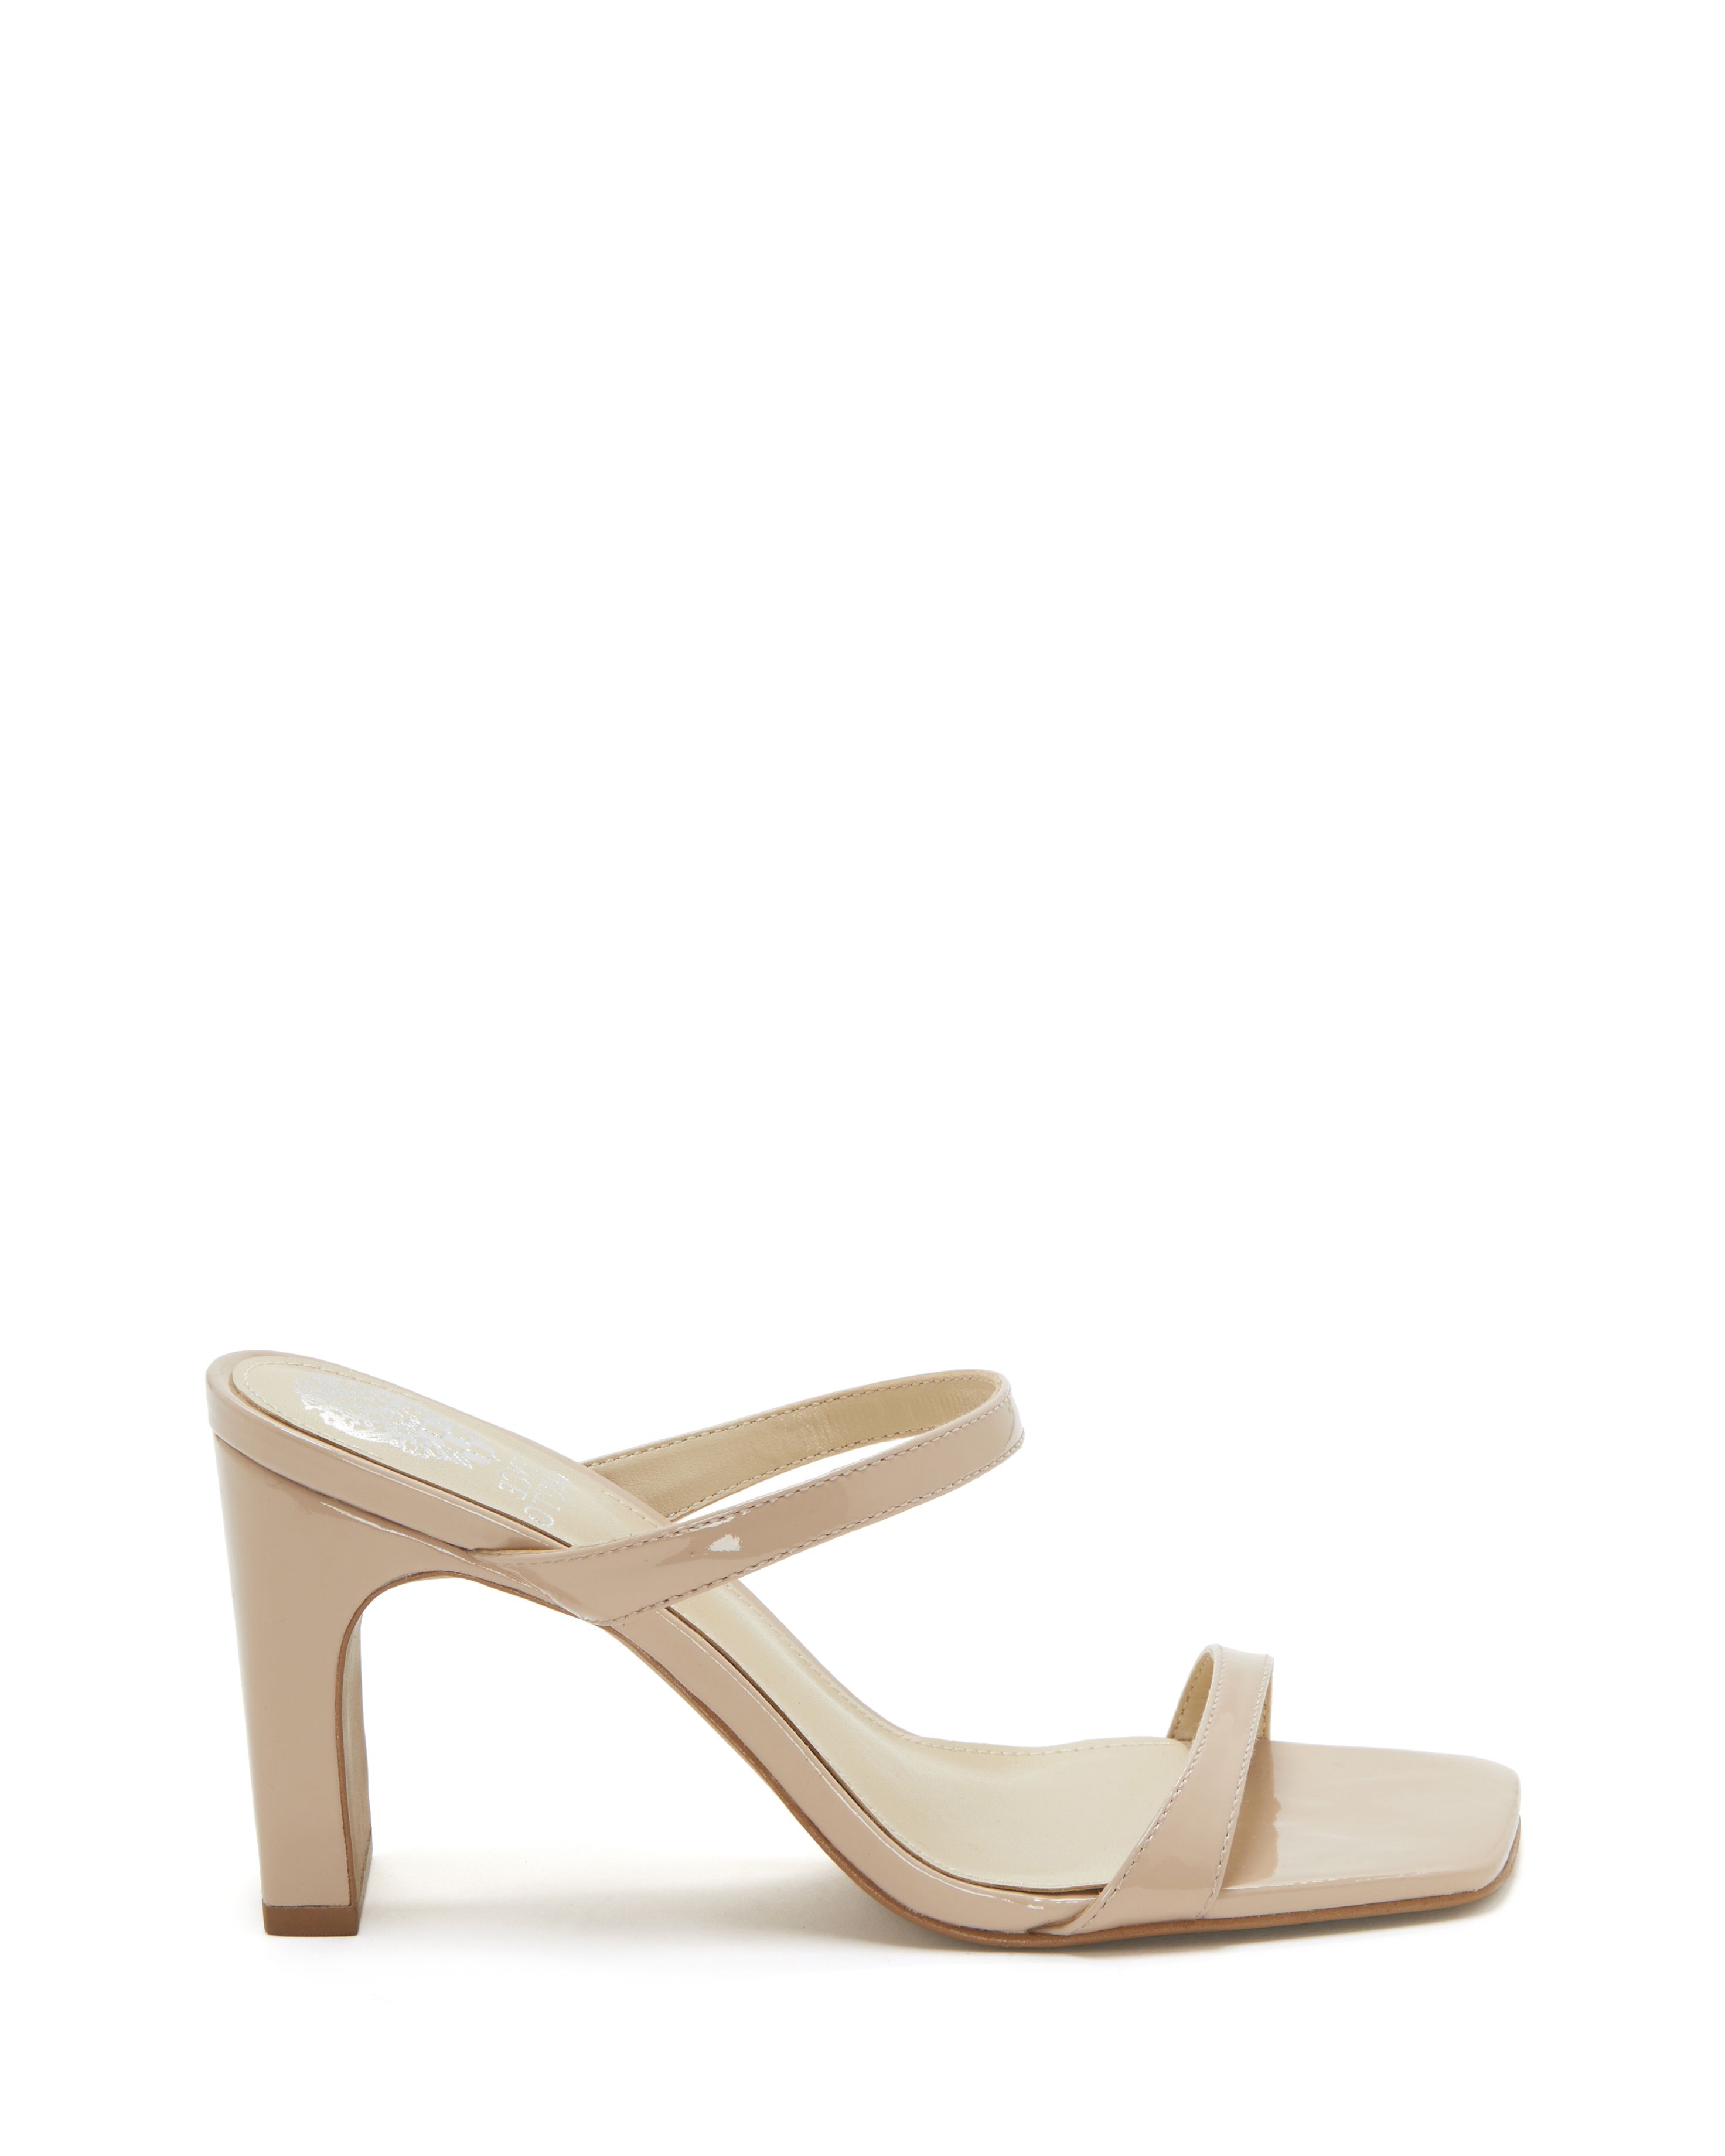 Vince Camuto Banndisa Mule | Vince Camuto